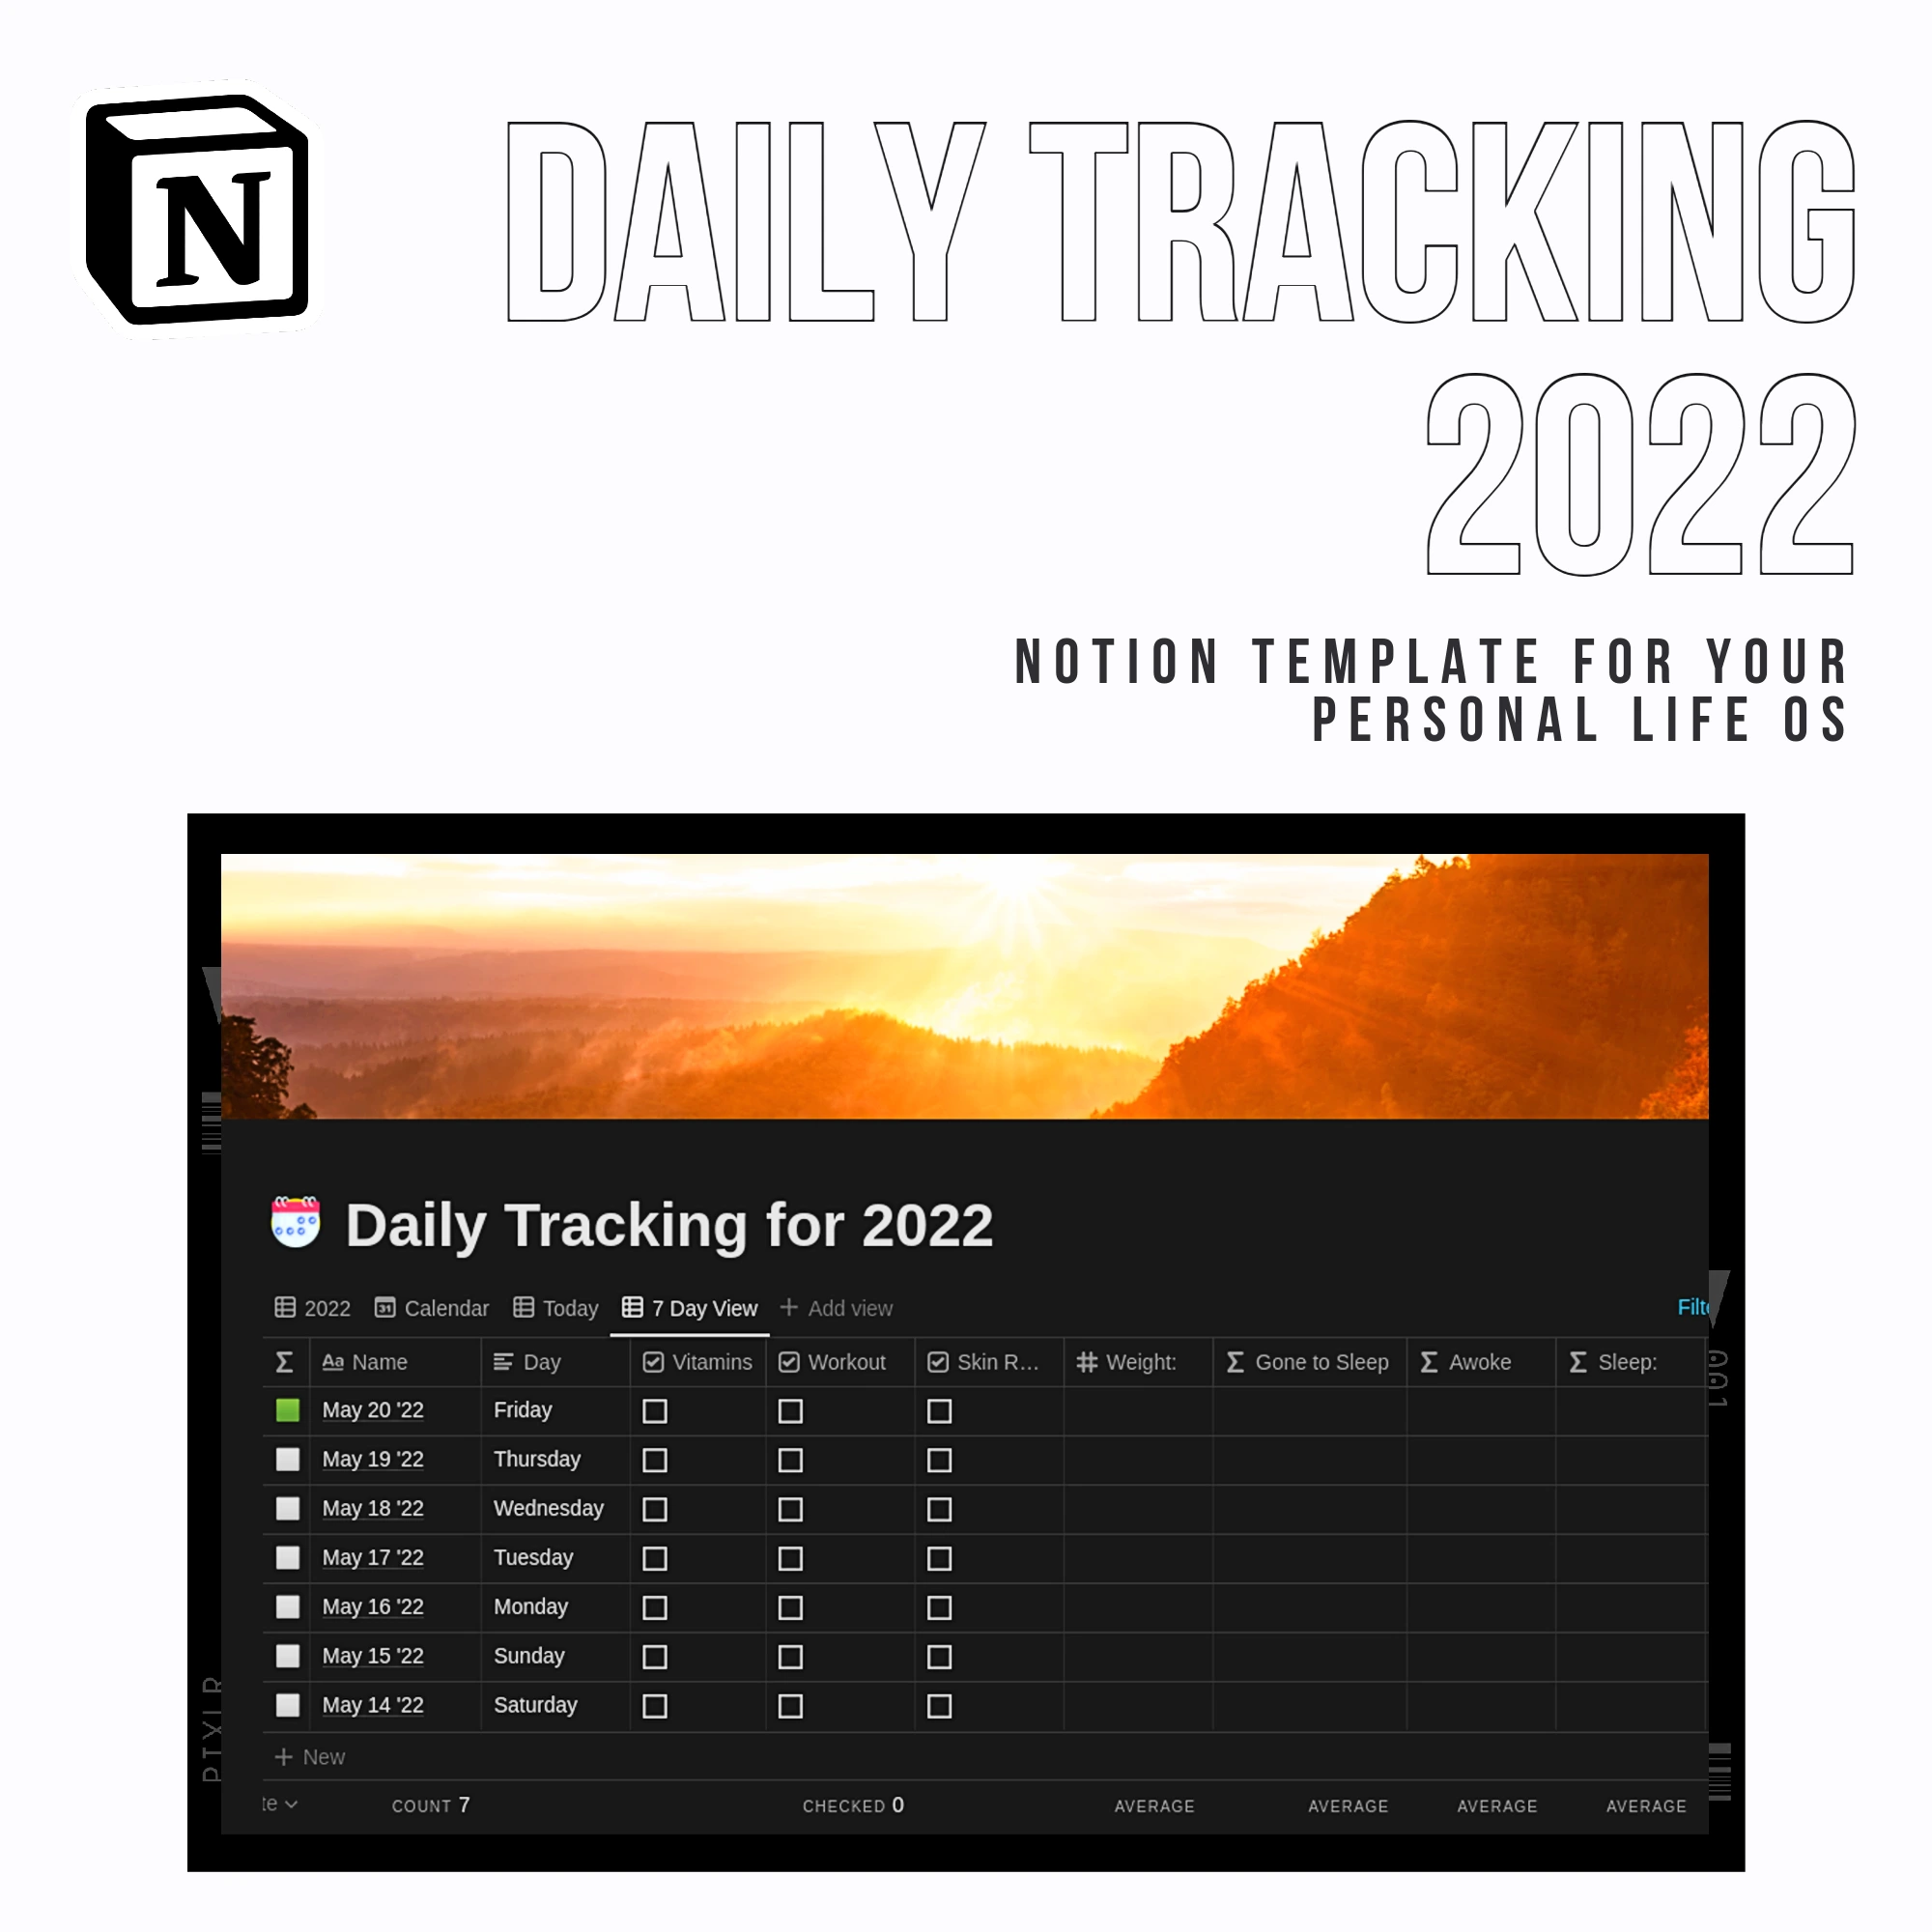 Daily_Tracking_2022_Notion_Template